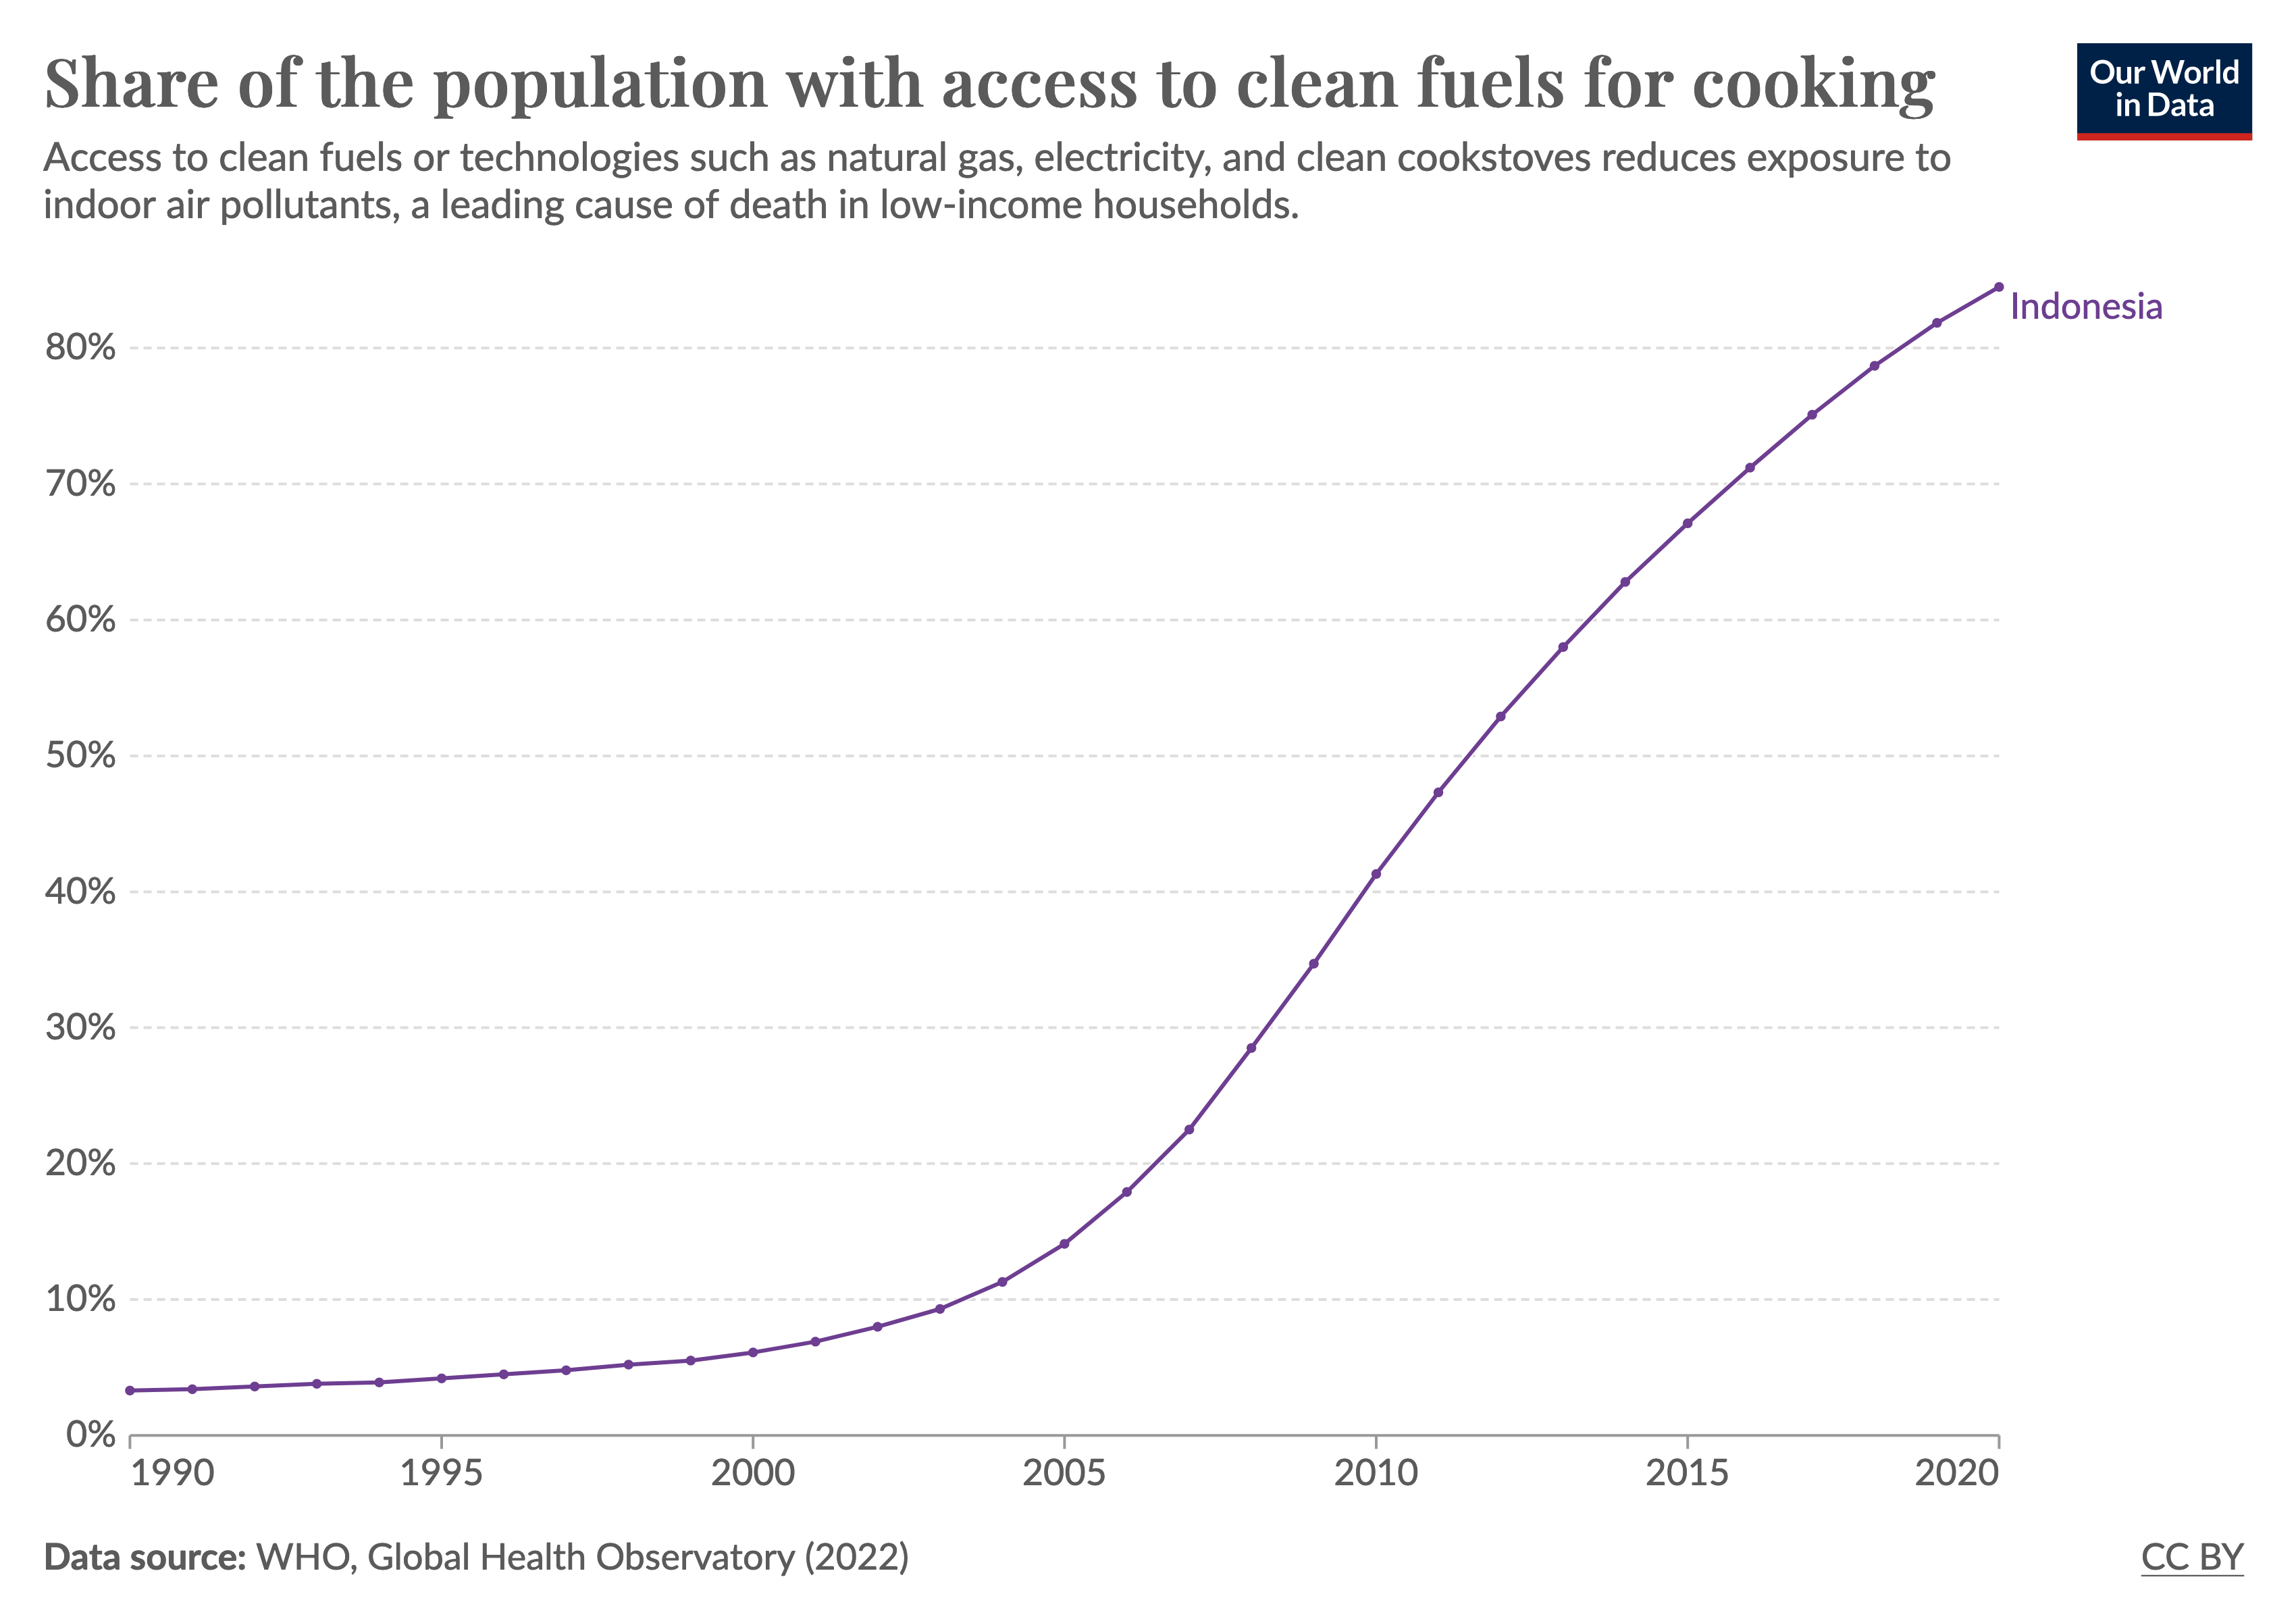 Indonesia’s shift to cleaner cooking fuels has greatly improved air quality and health